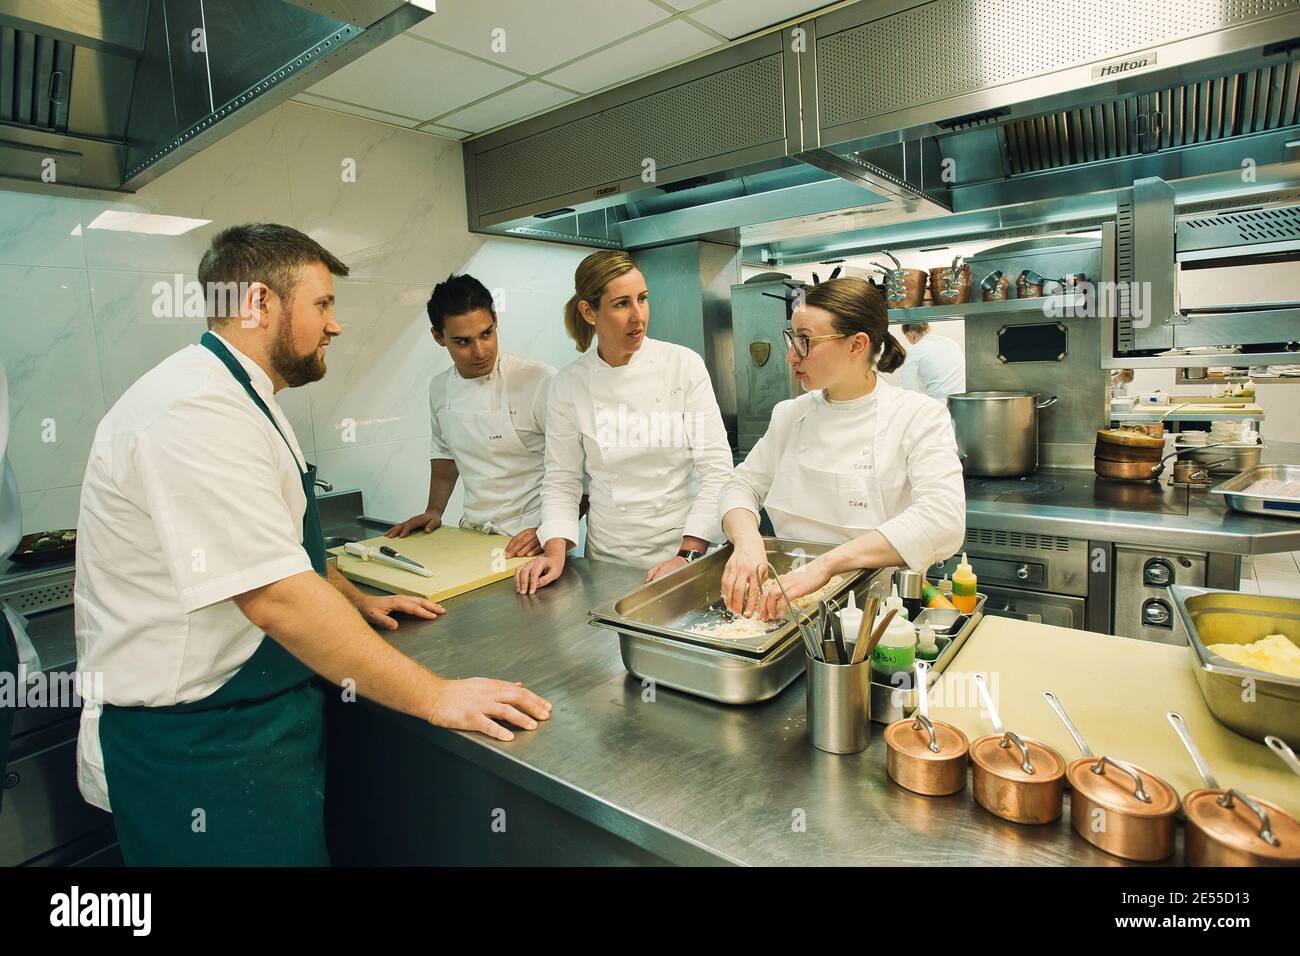 Clare Smyth and her team working in the kitchen at the Core by Clare Smyth restaurant in the Notting Hill district of London, UK Stock Photo